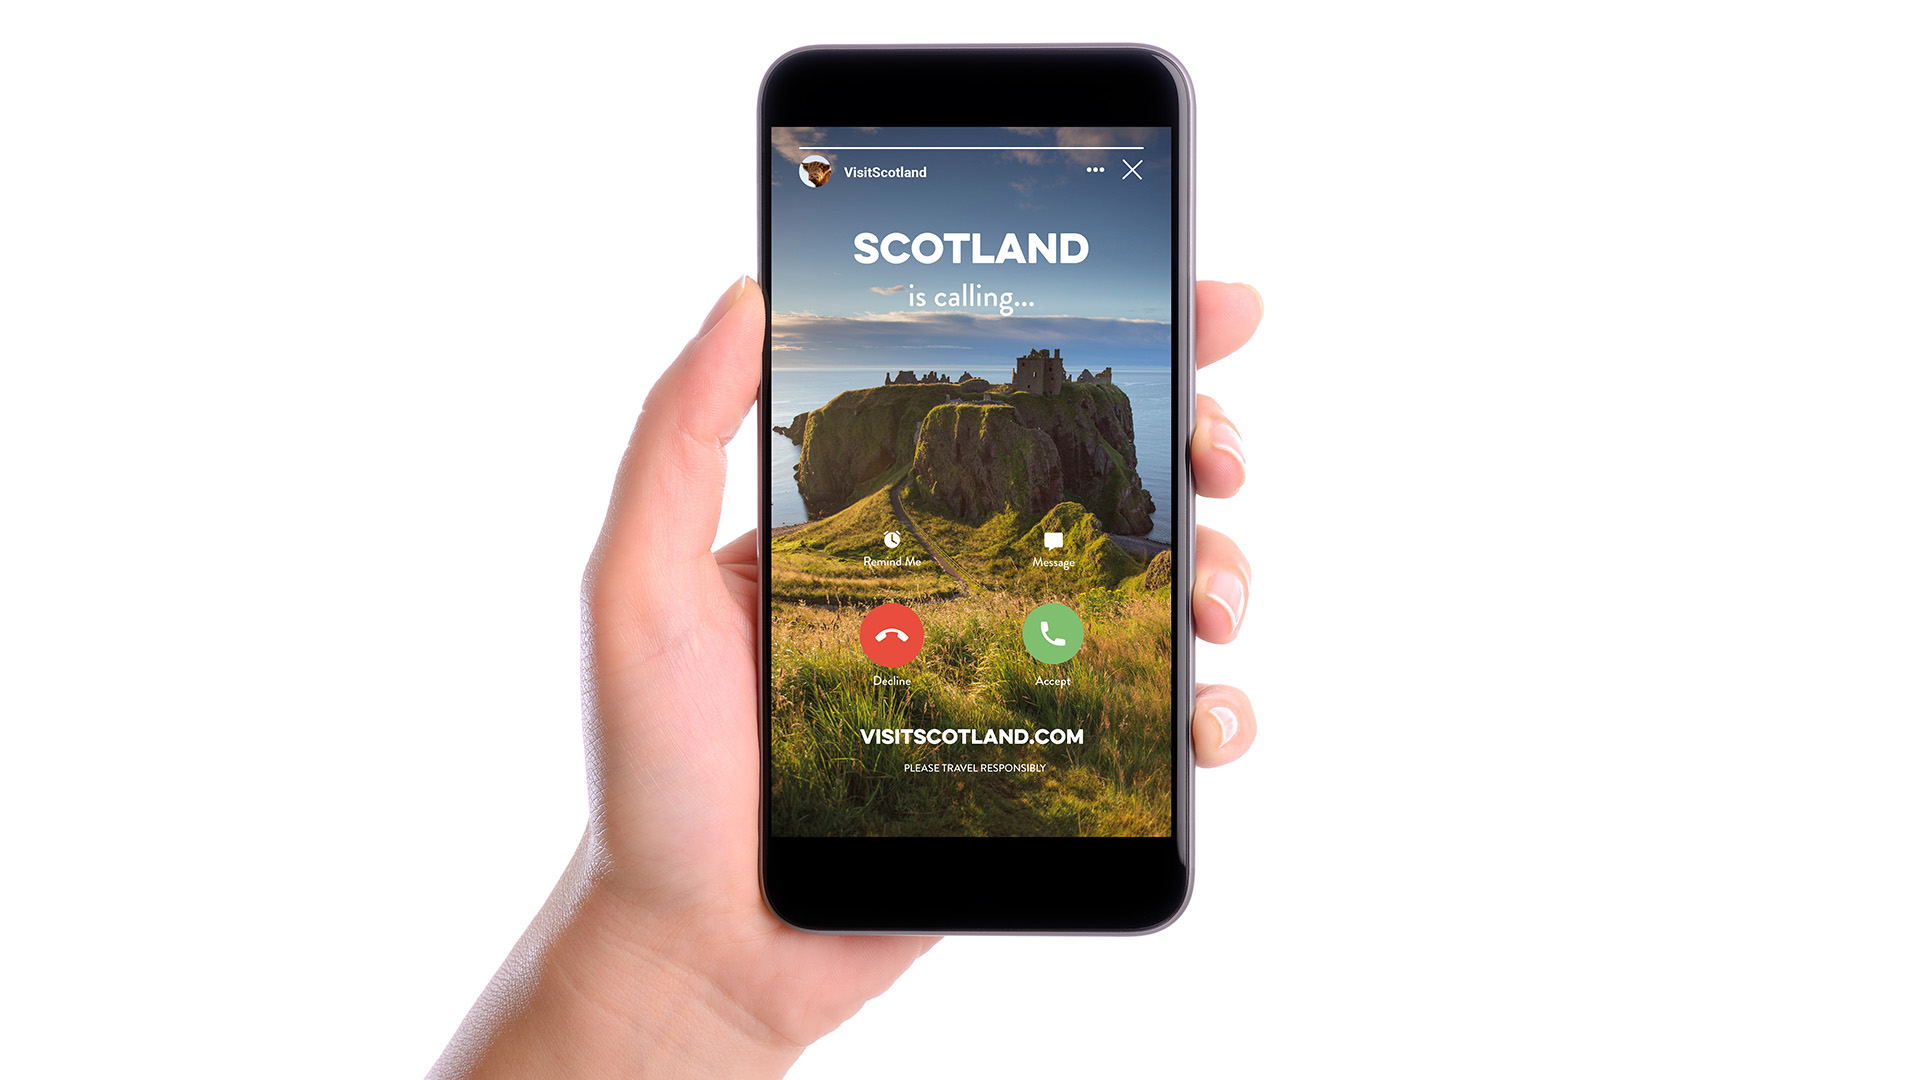 image of a hand holding a phone, which shows Scotland calling